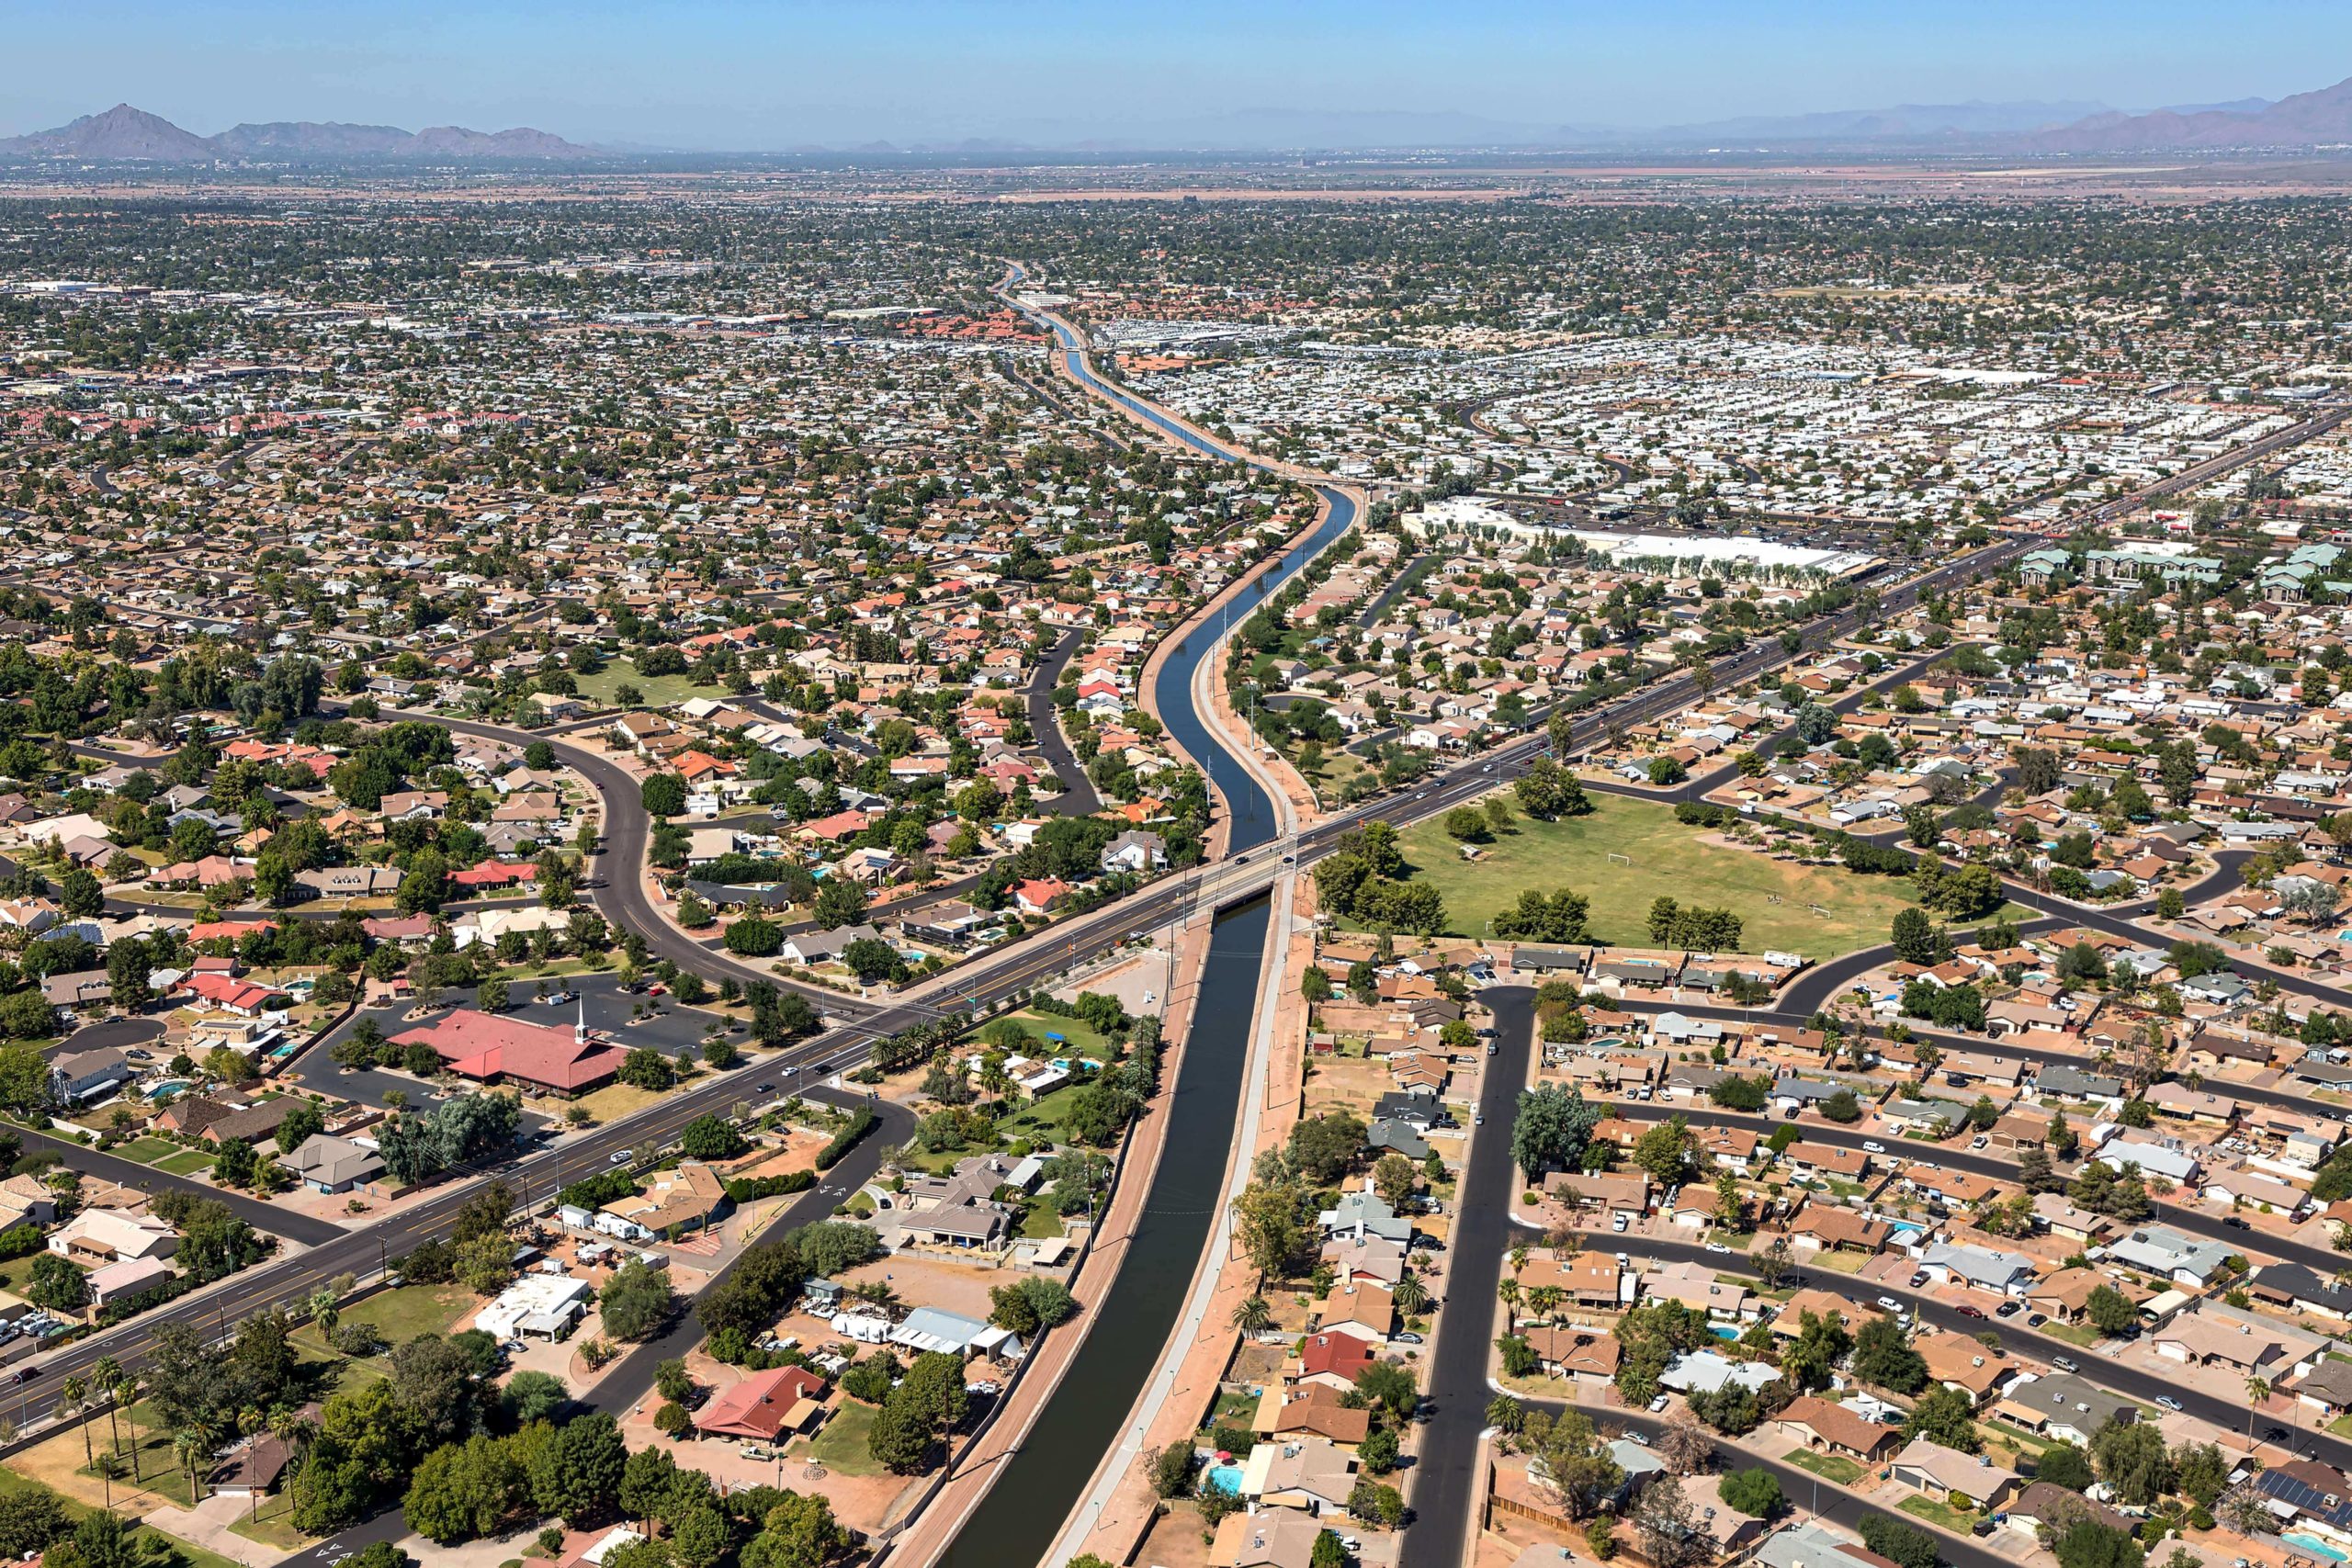 view of activities and locations in mesa arizona